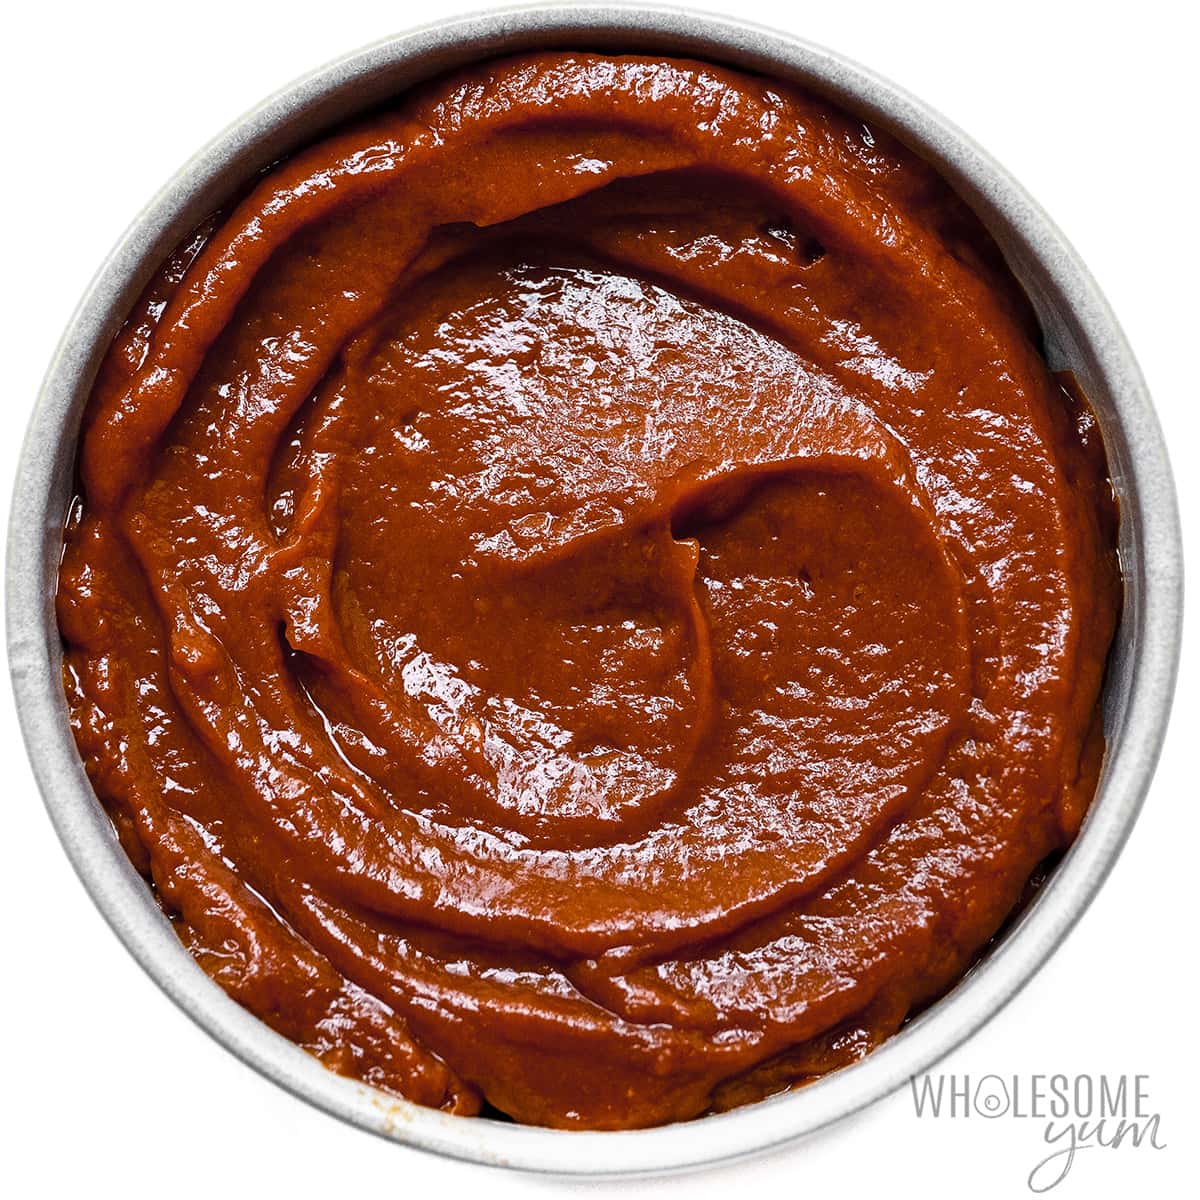 Sugar free barbecue sauce in a bowl.